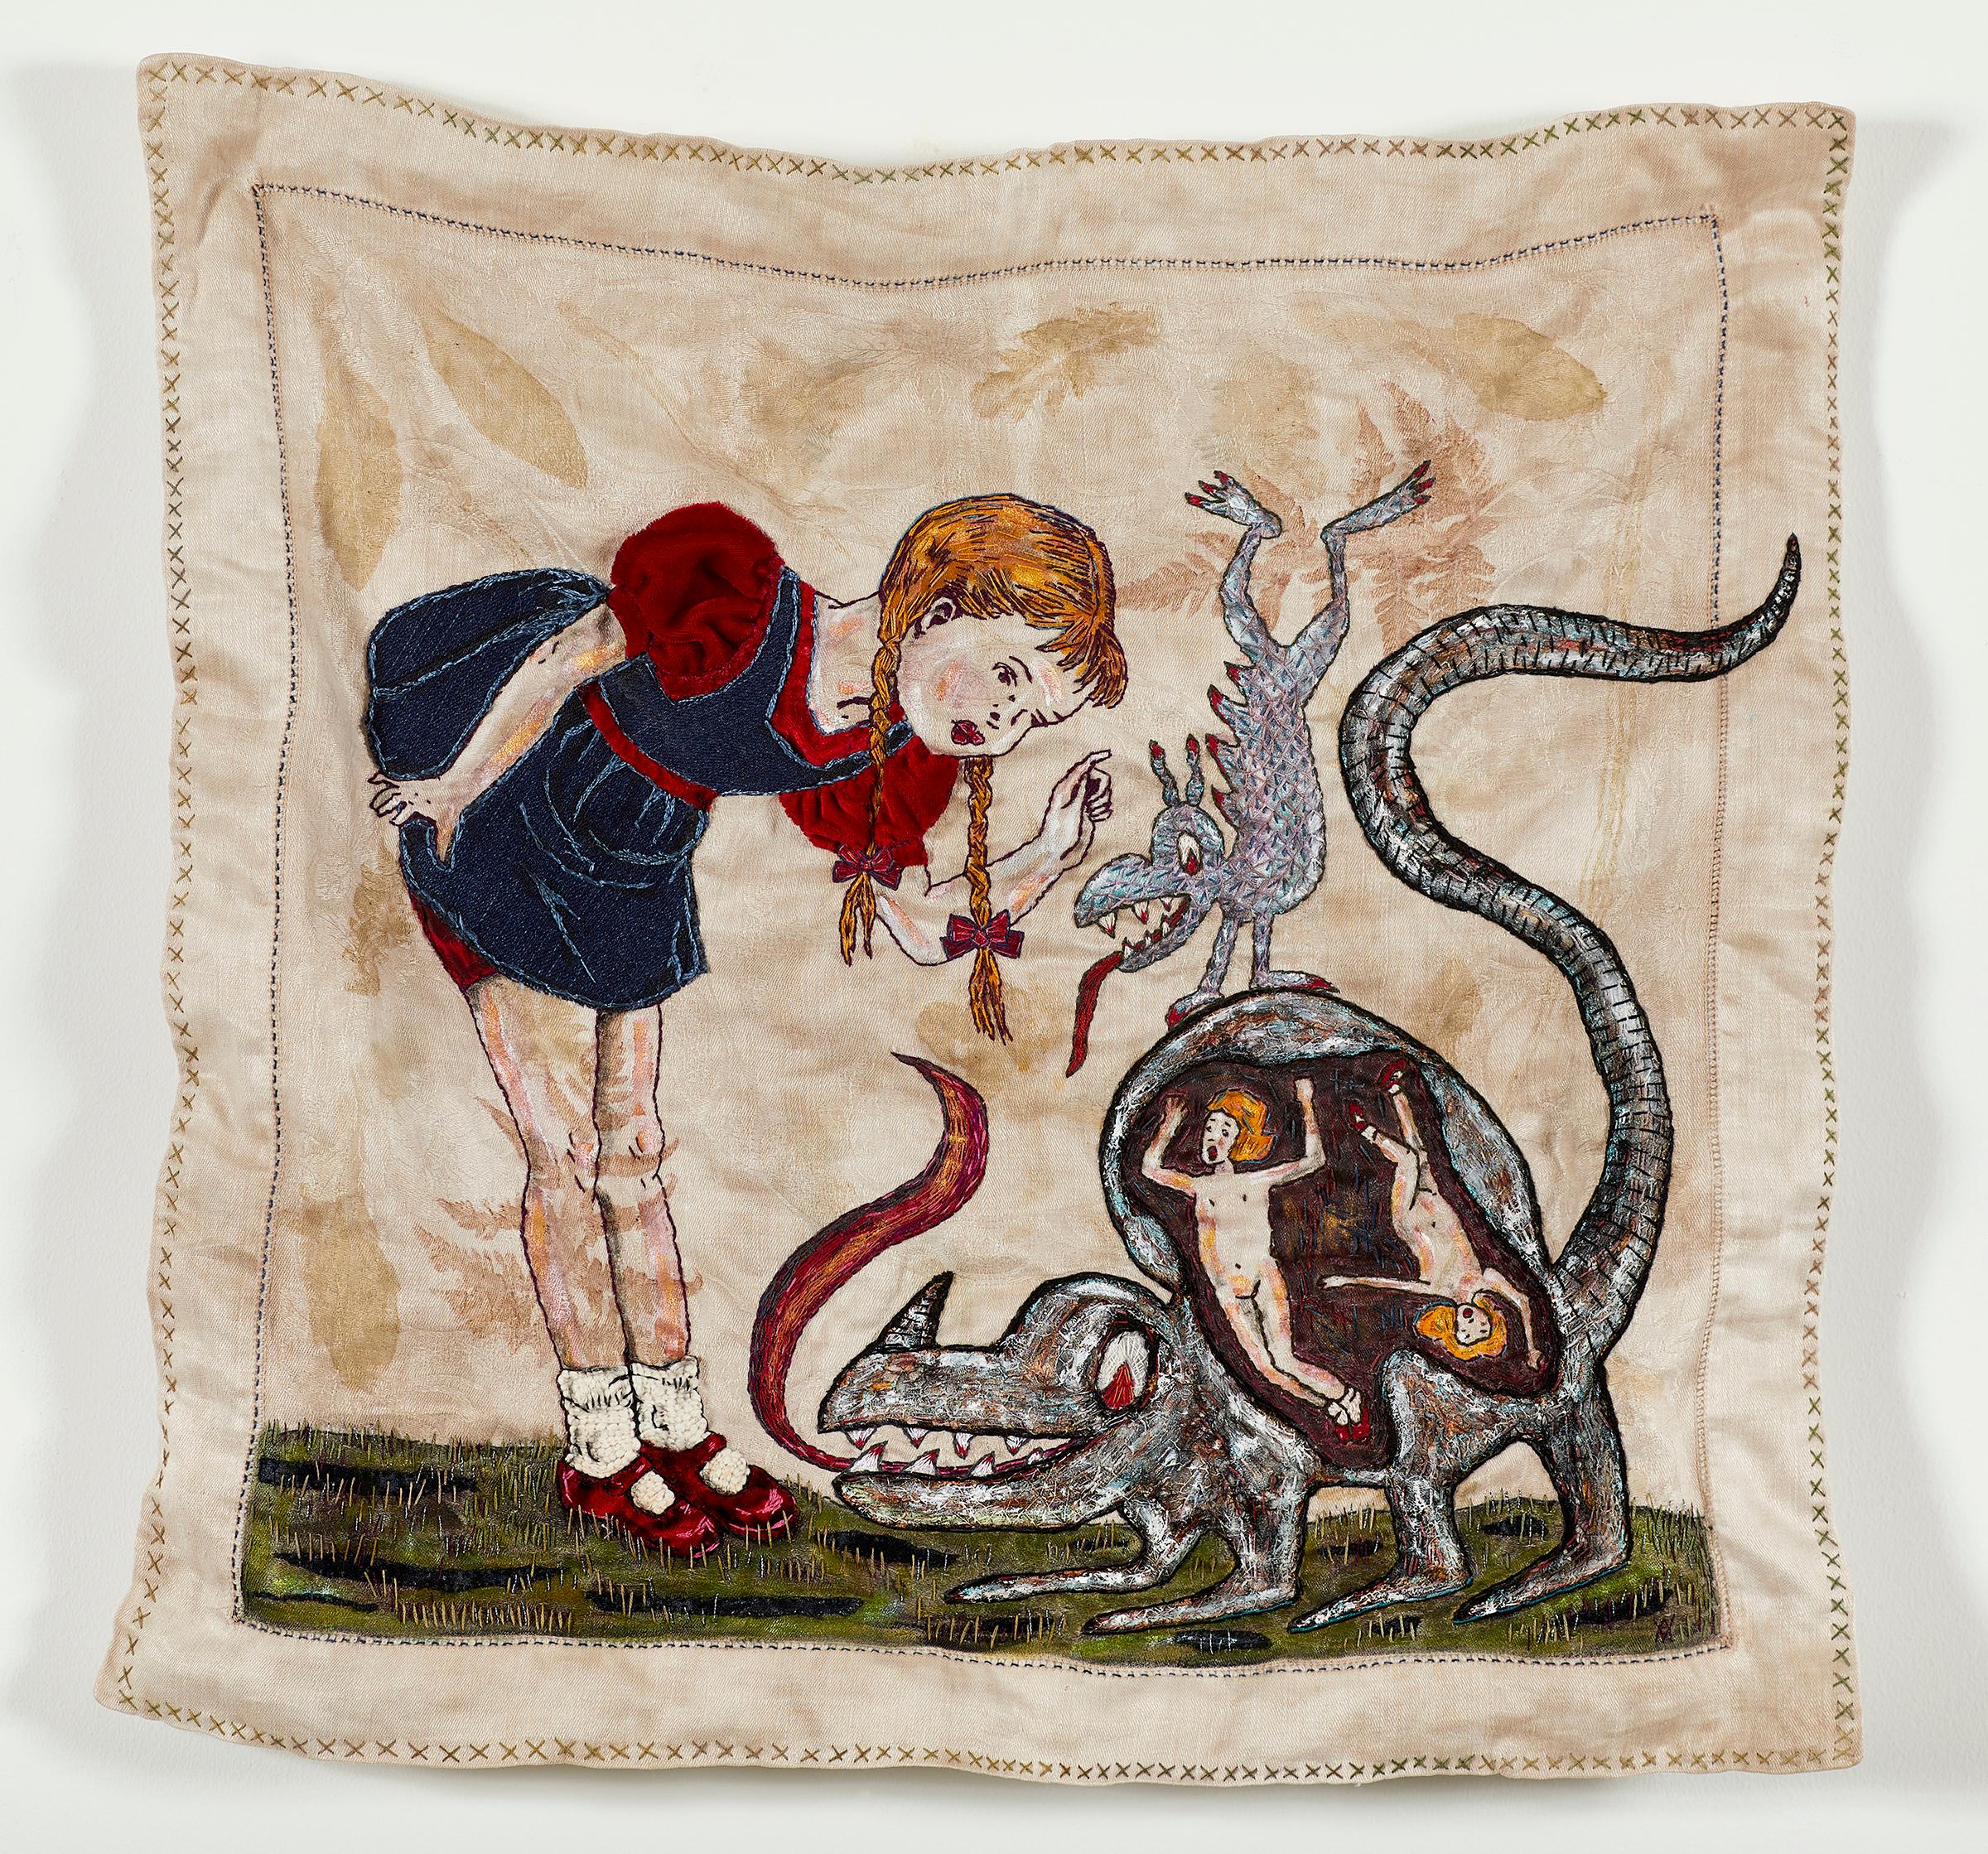 Ann Vollum Figurative Painting - Fiber, Mixed Media, Hand Stitched: 'Girls Know Best!'